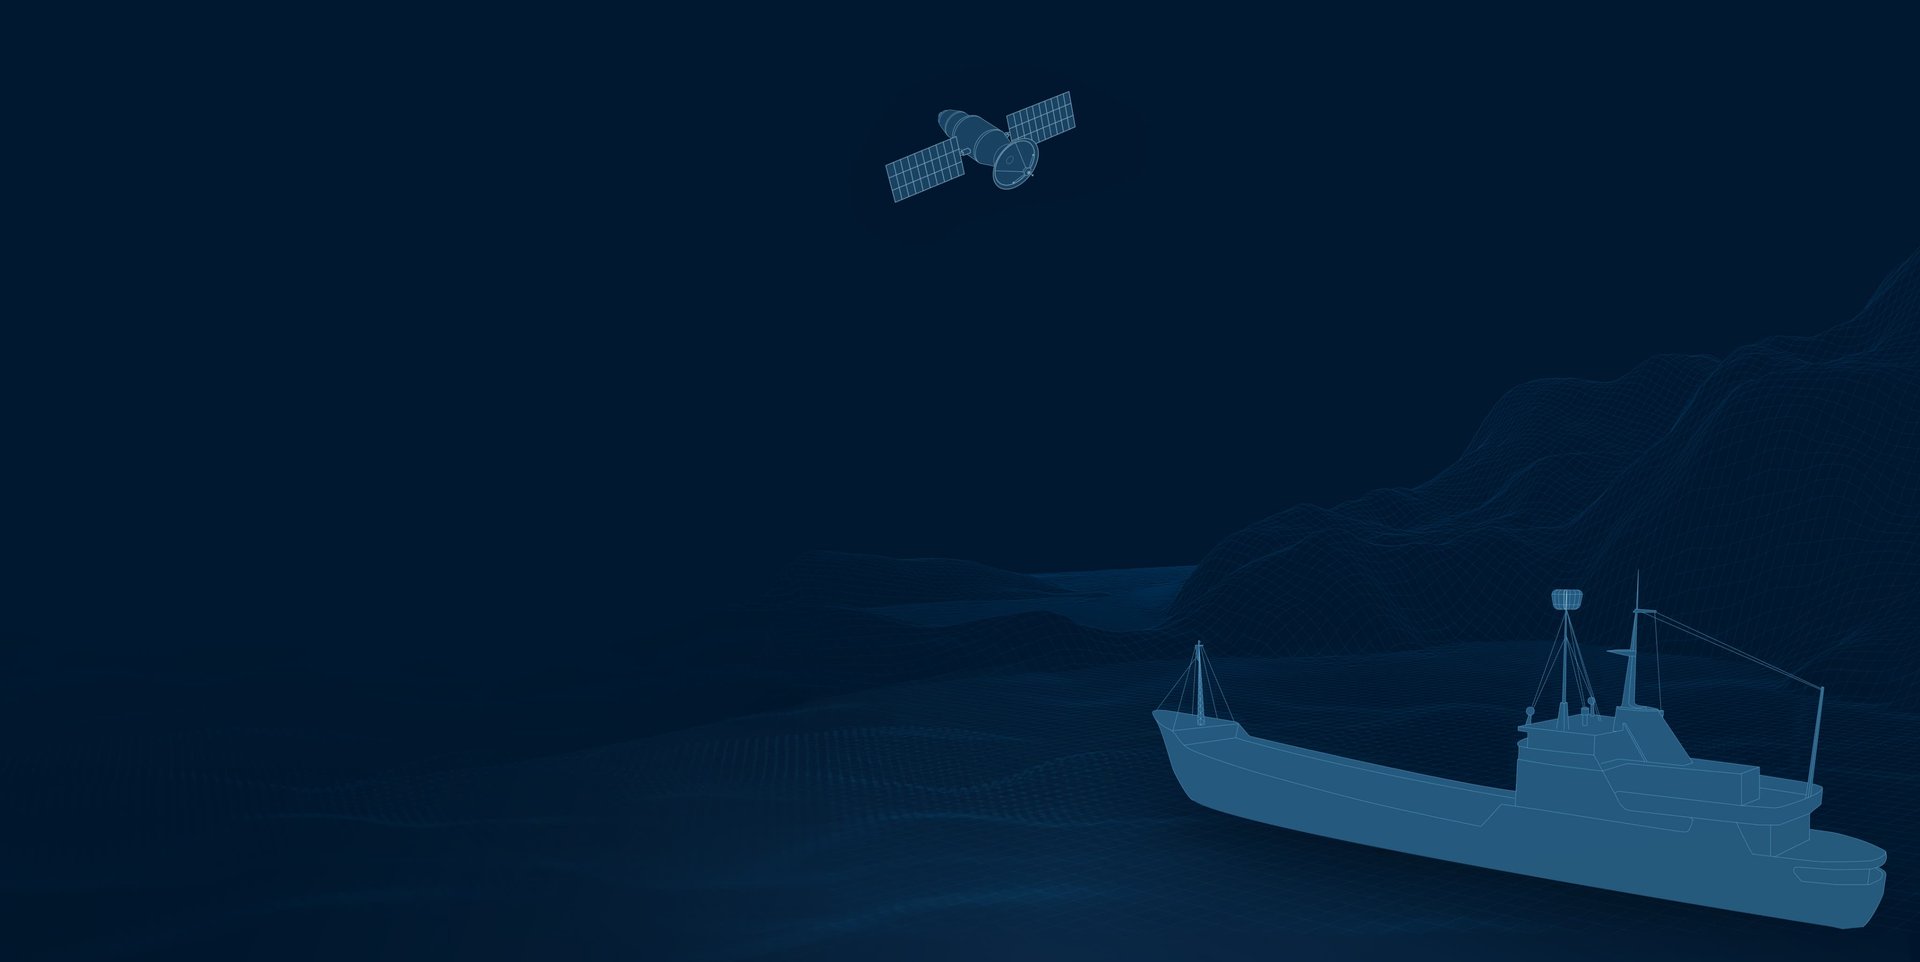 Dark blue digital illustration of a ship and satellite at sea, conveying high-tech navigation and connectivity in maritime operations